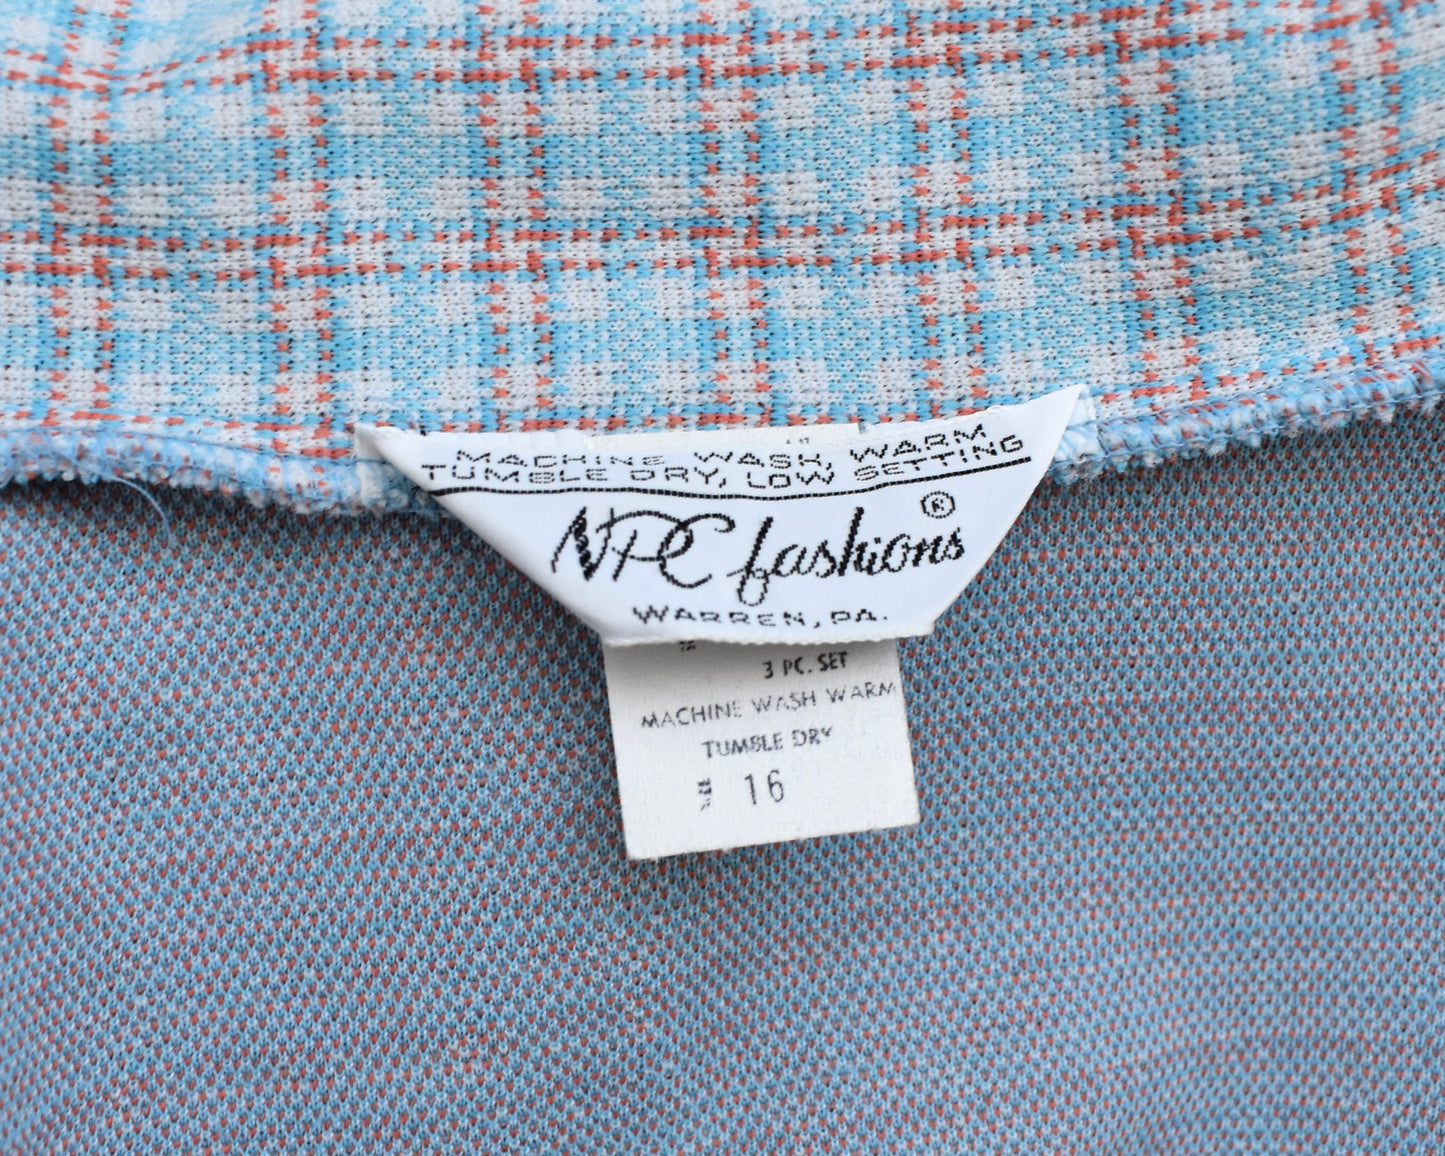 Close up of the tag which says NPC Fashions